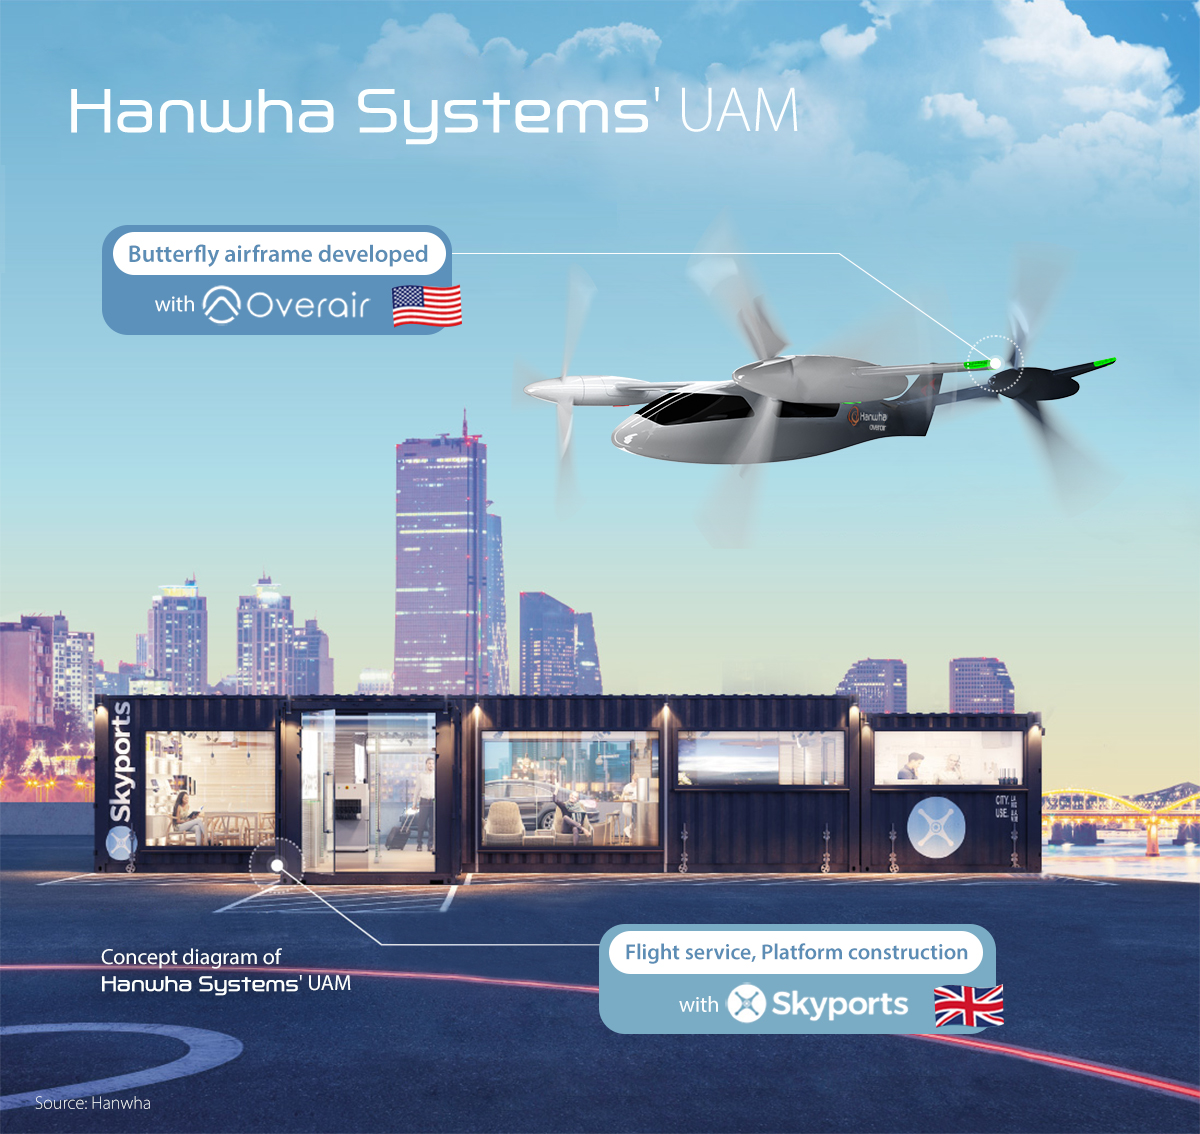 Hanwha Systems is working with Overair to develop the airframe of the Butterfly eVTOL.